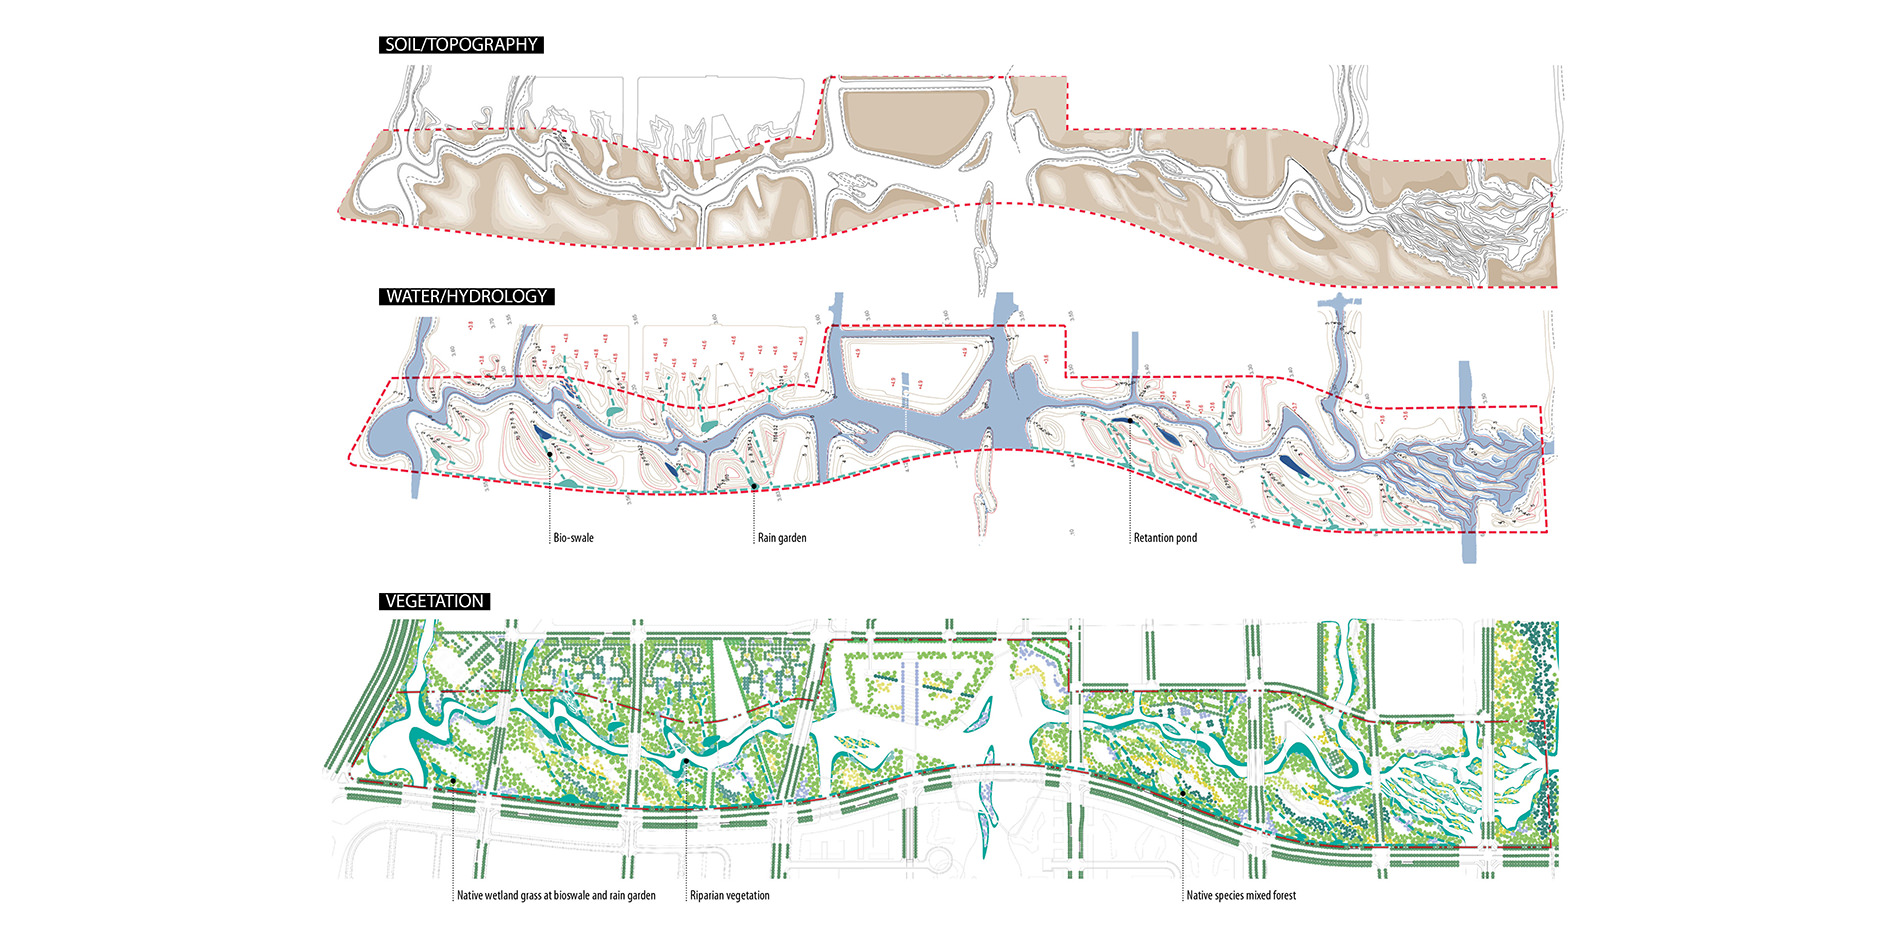 Topography, Hydrology, and Vegetation Maps